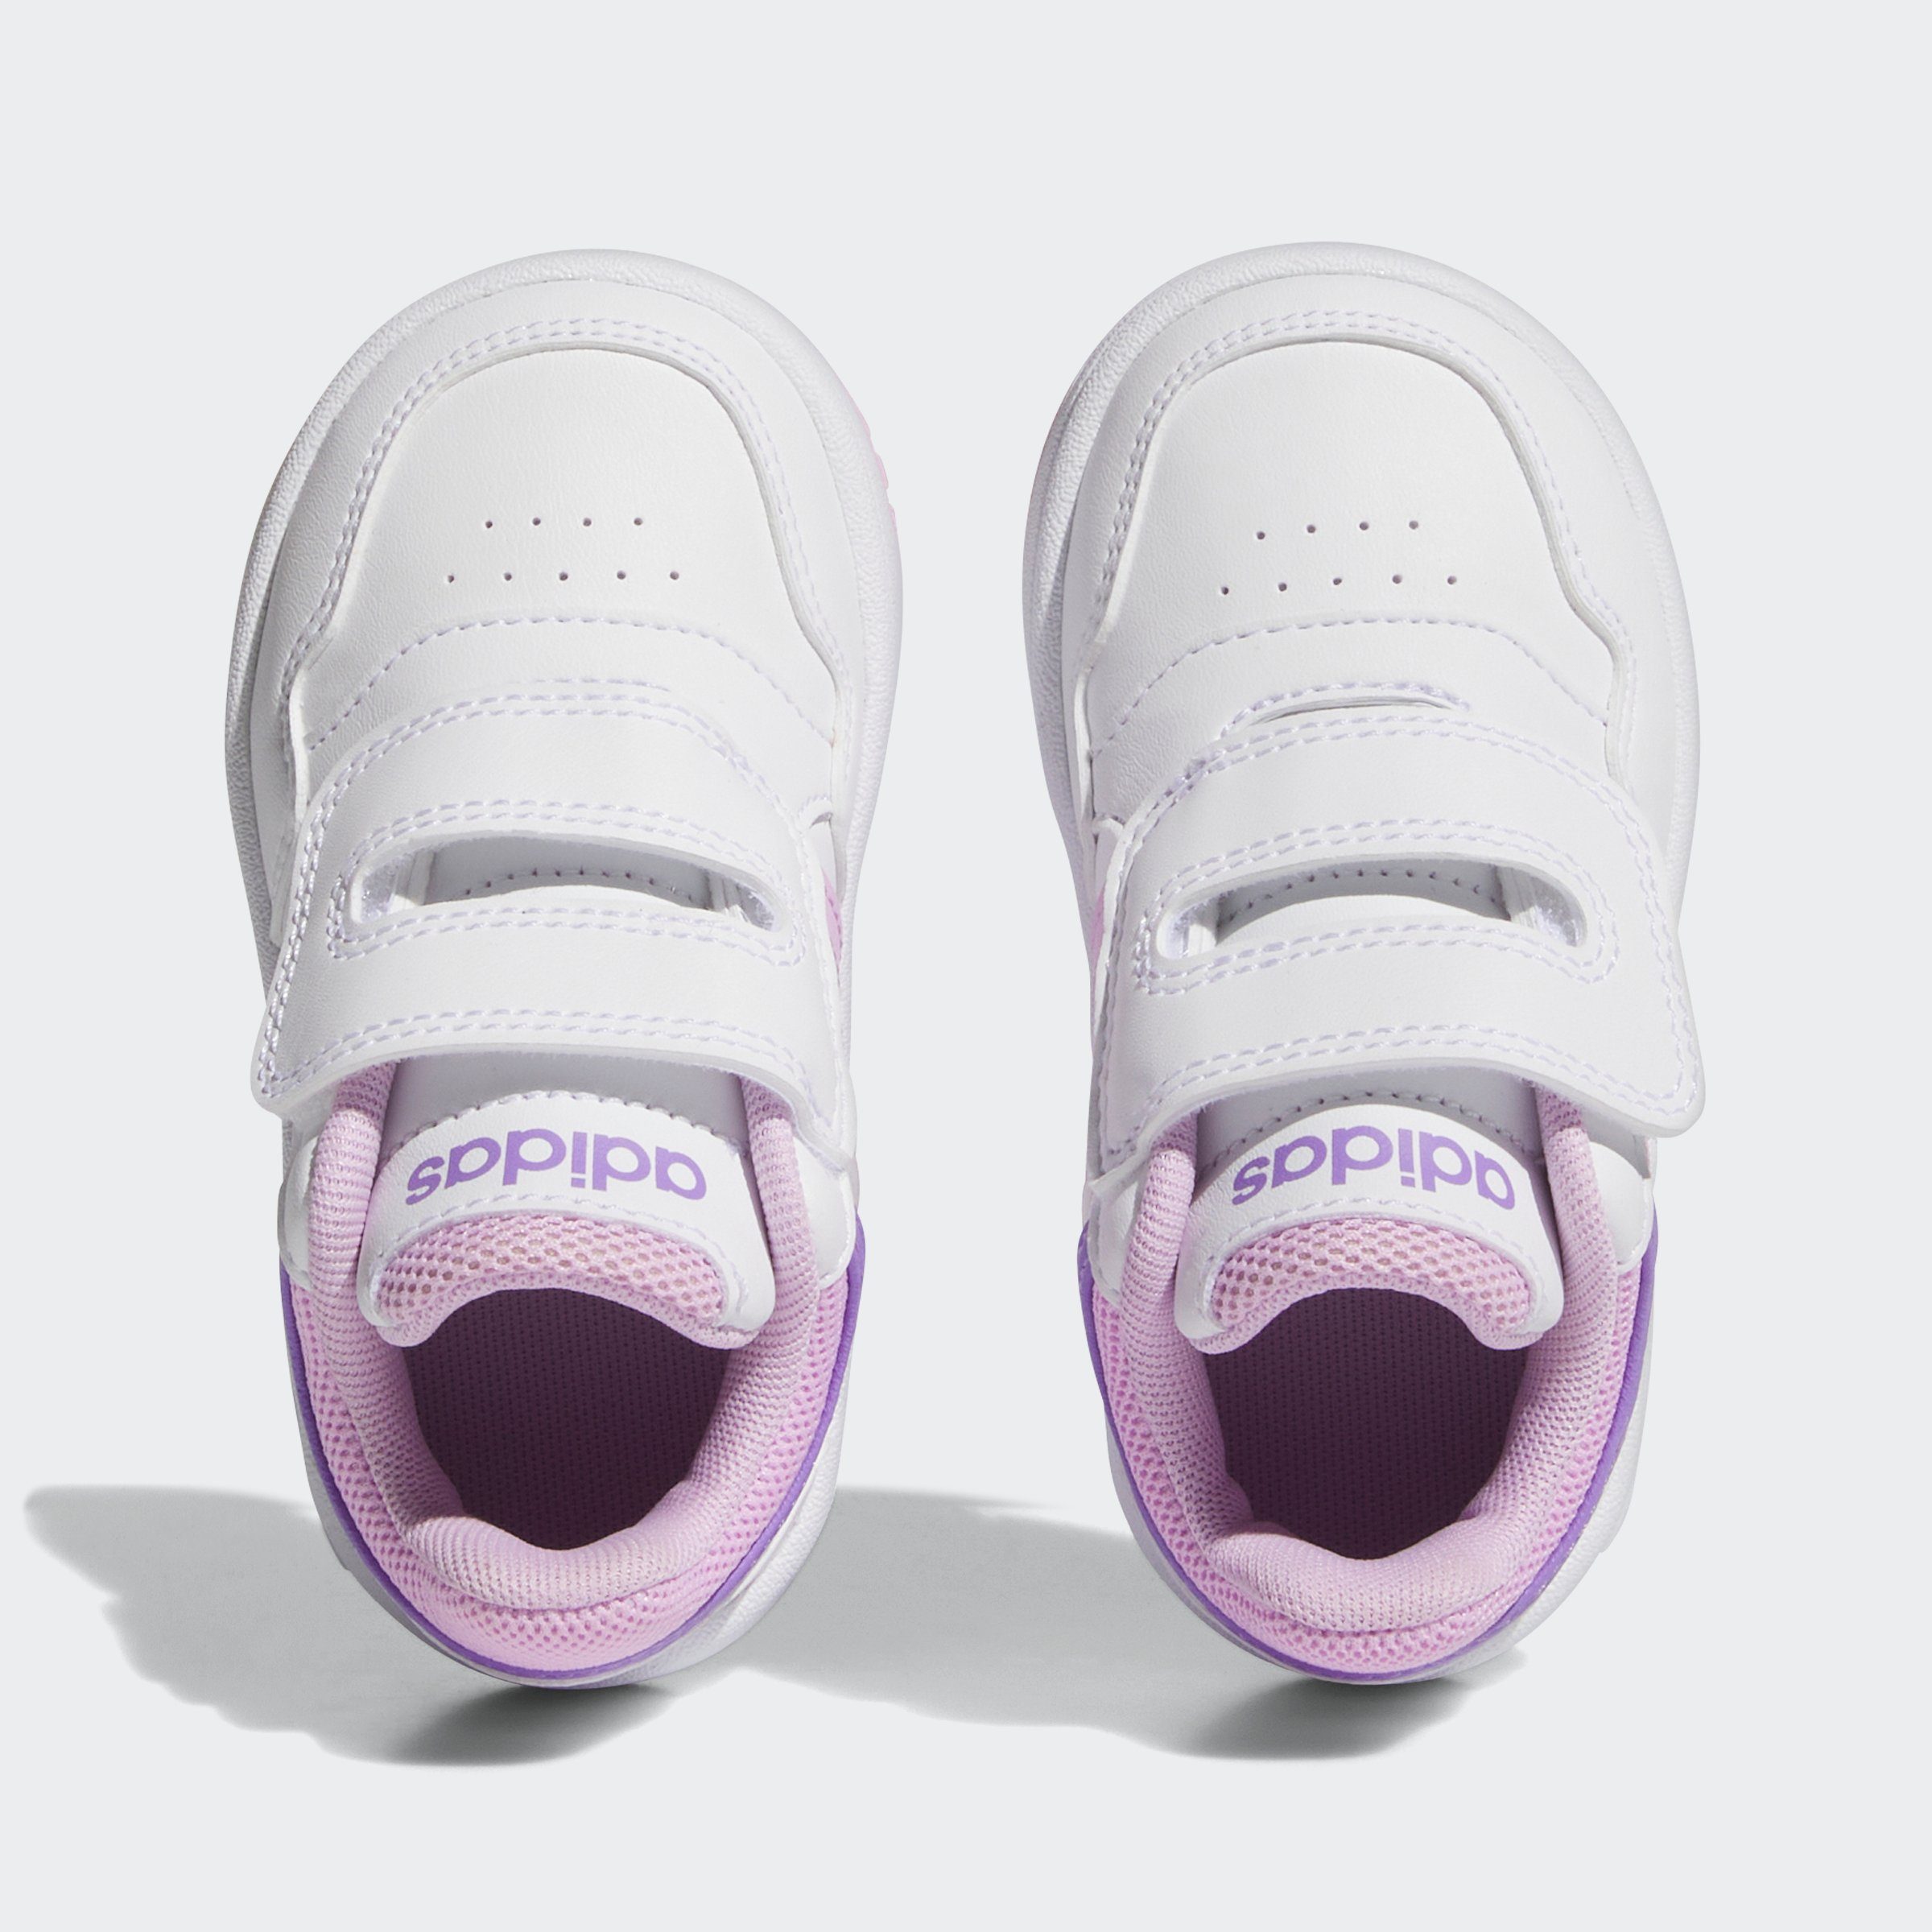 adidas Sportswear / Bliss White Sneaker / Violet Fusion HOOPS Cloud Lilac